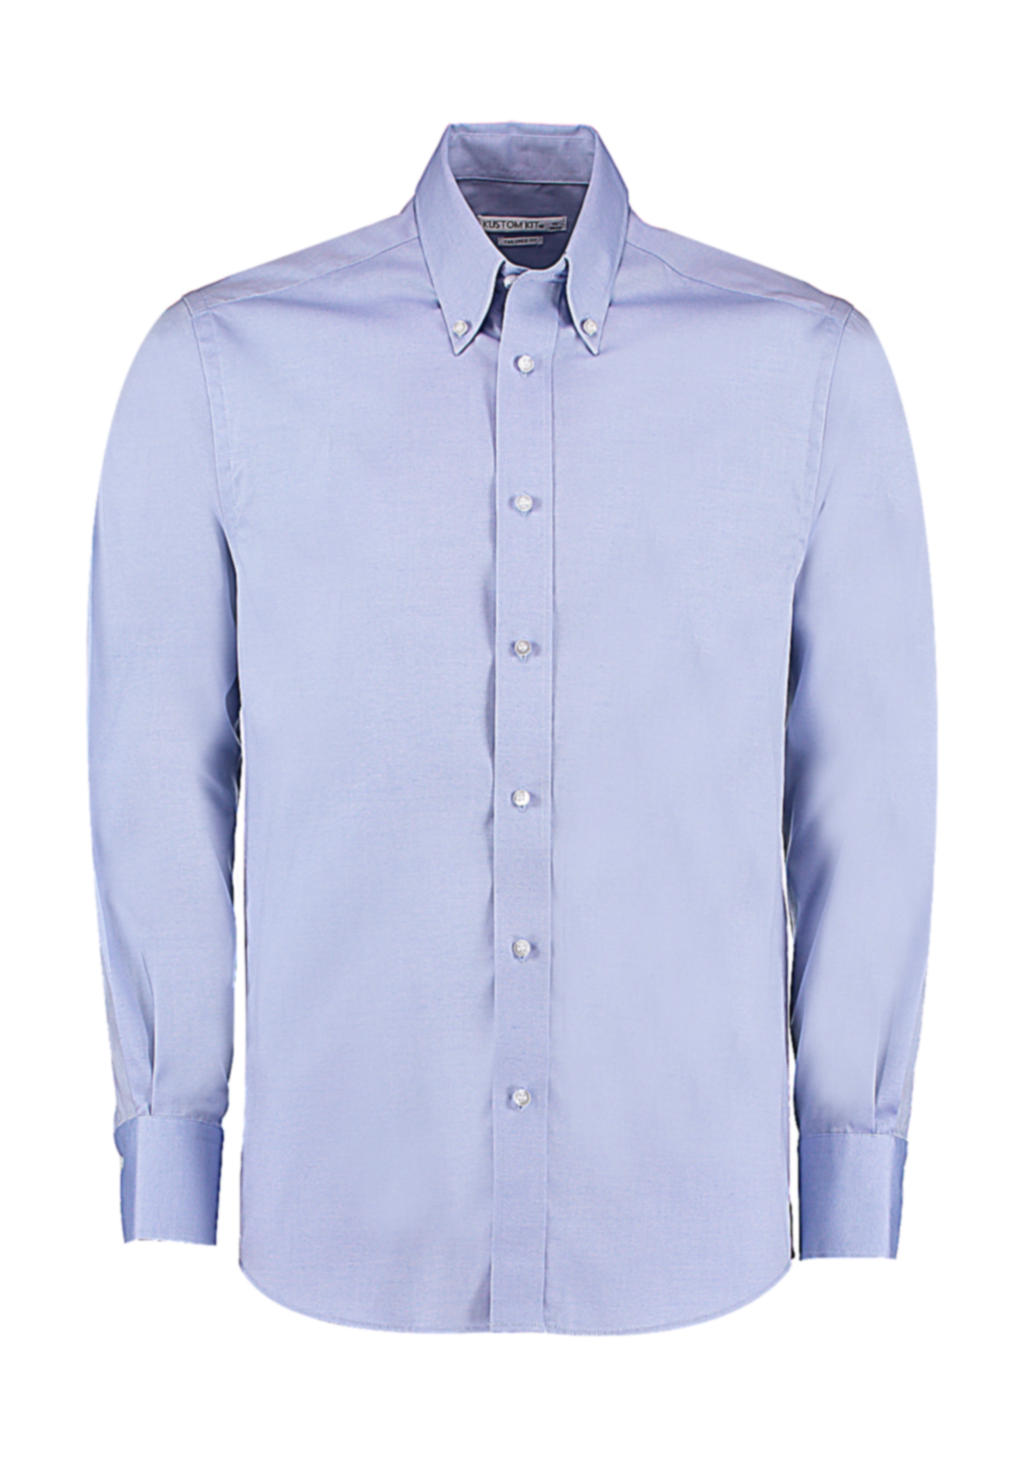  Tailored Fit Premium Oxford Shirt in Farbe Light Blue